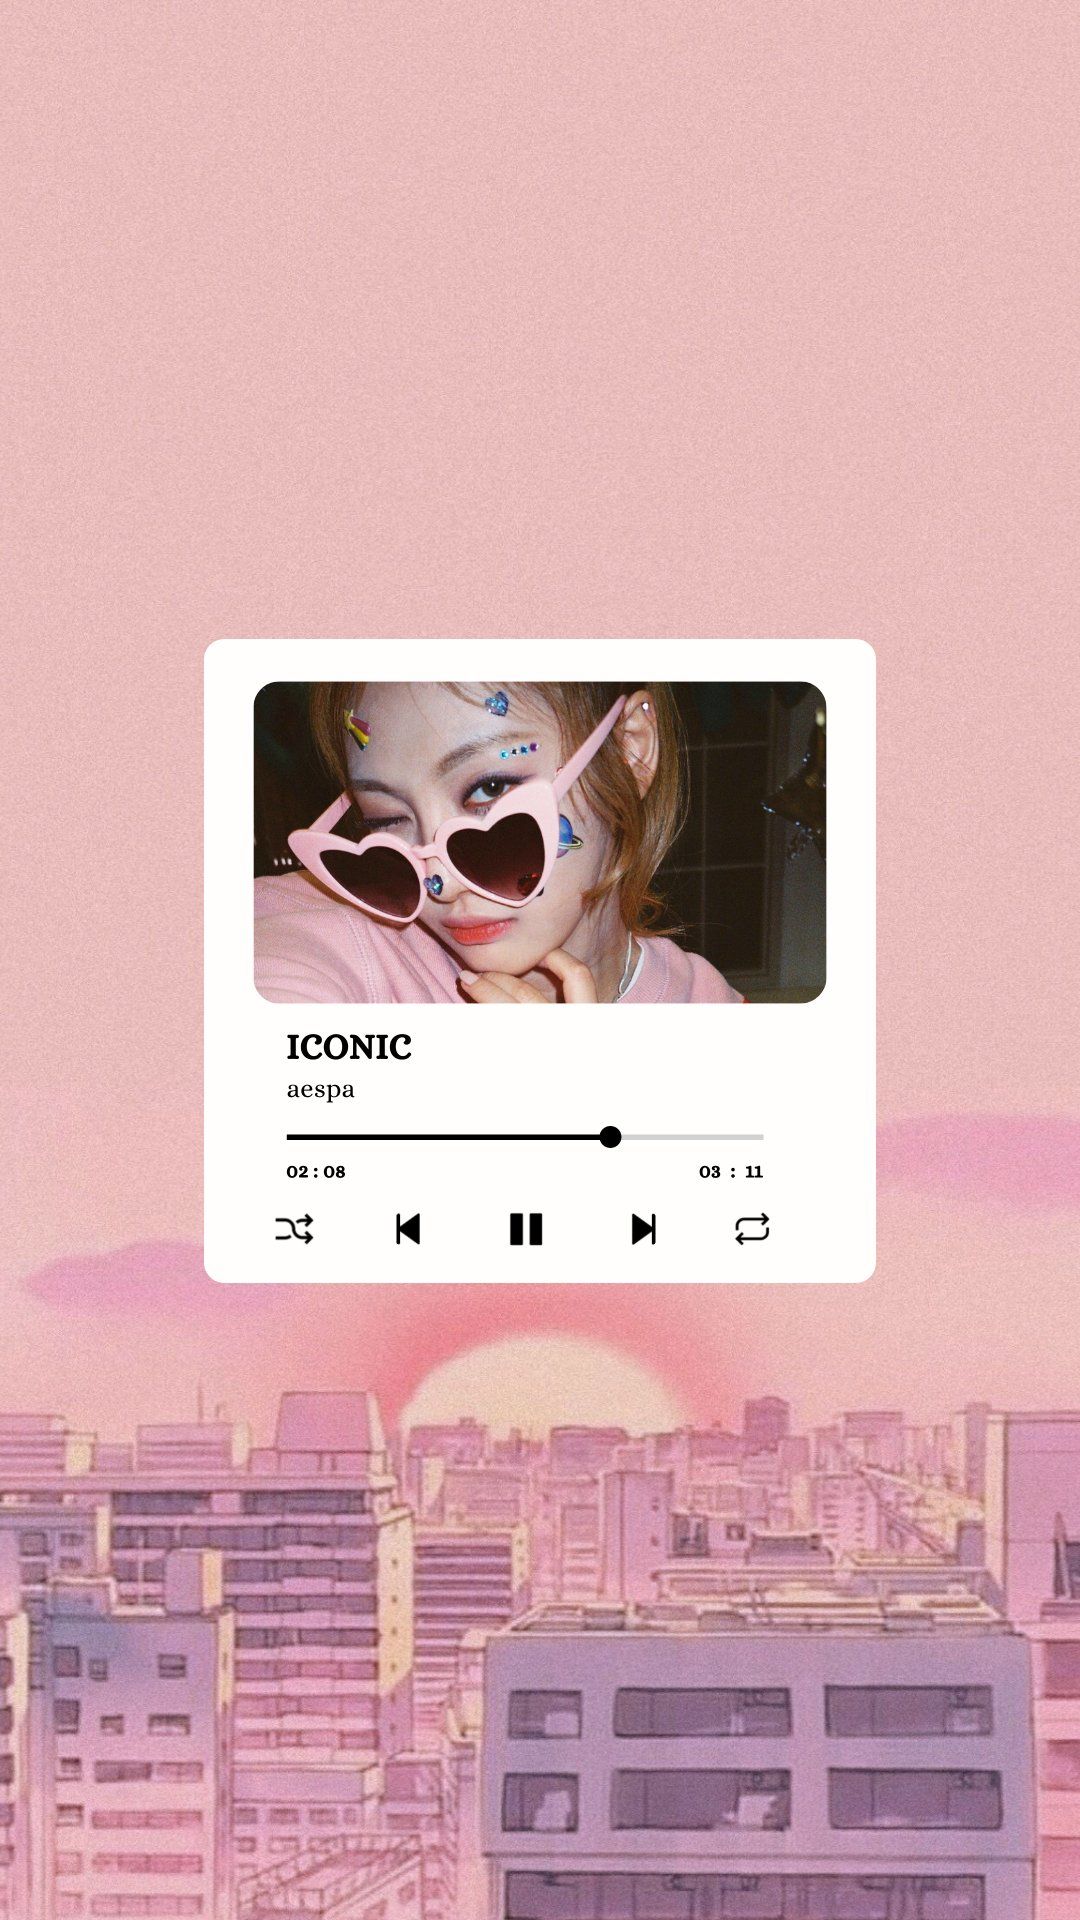 Pink aesthetic phone background with a music player - Aespa